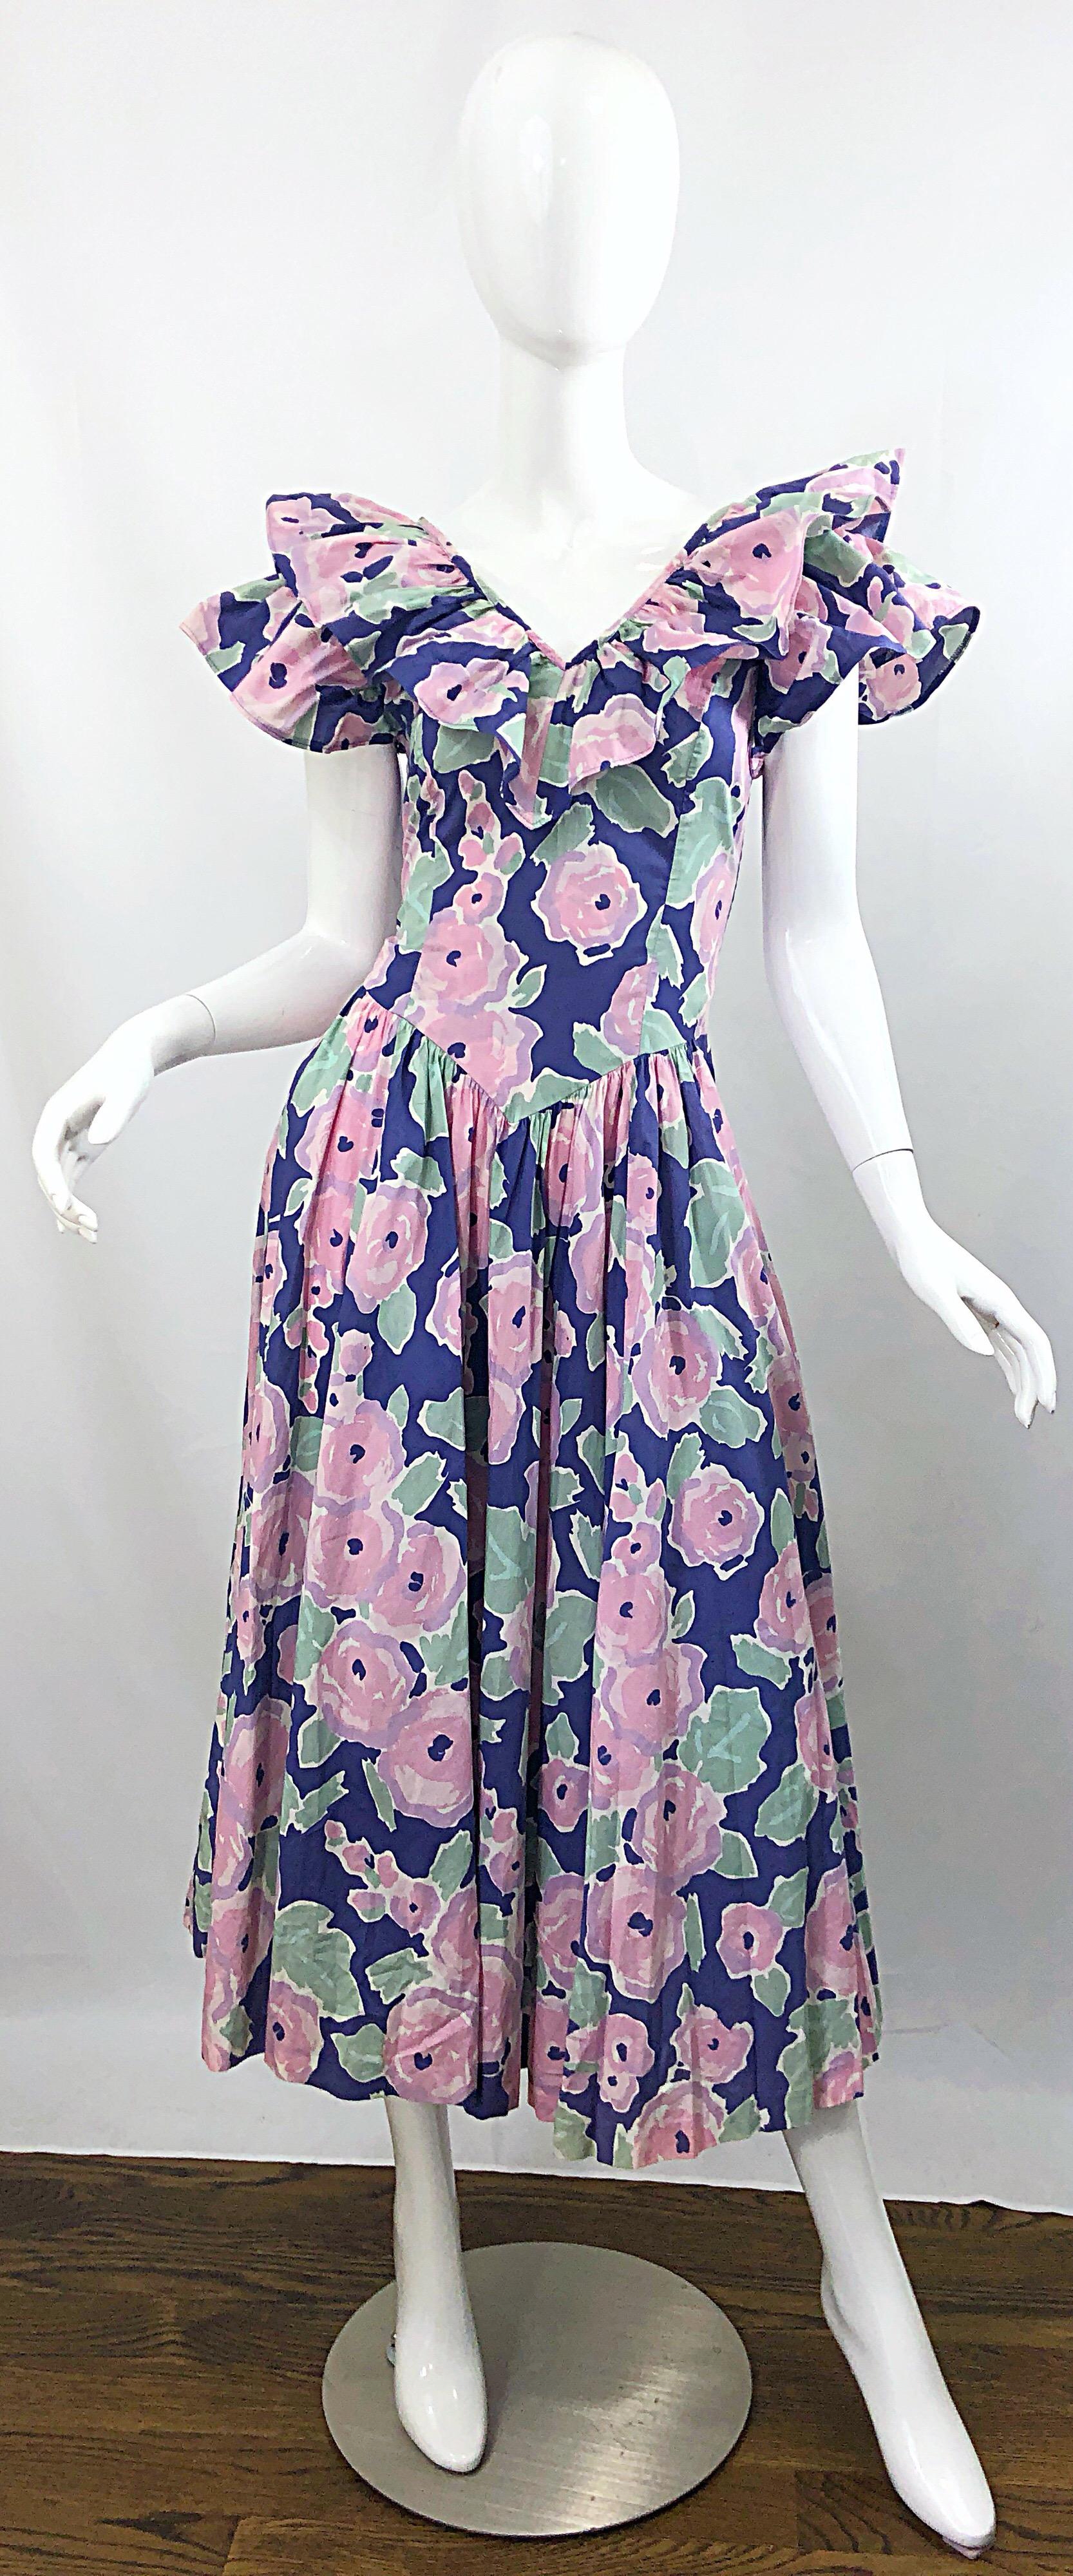 Rare and iconic early 1980s LAURA ASHLEY Batsheva Avant Garde purple, pink and green cotton midi dress! Features the signature Ashley floral print. Great double layer of ruffled sleeves. POCKETS at each side of the hips. Fitted bodice with a free